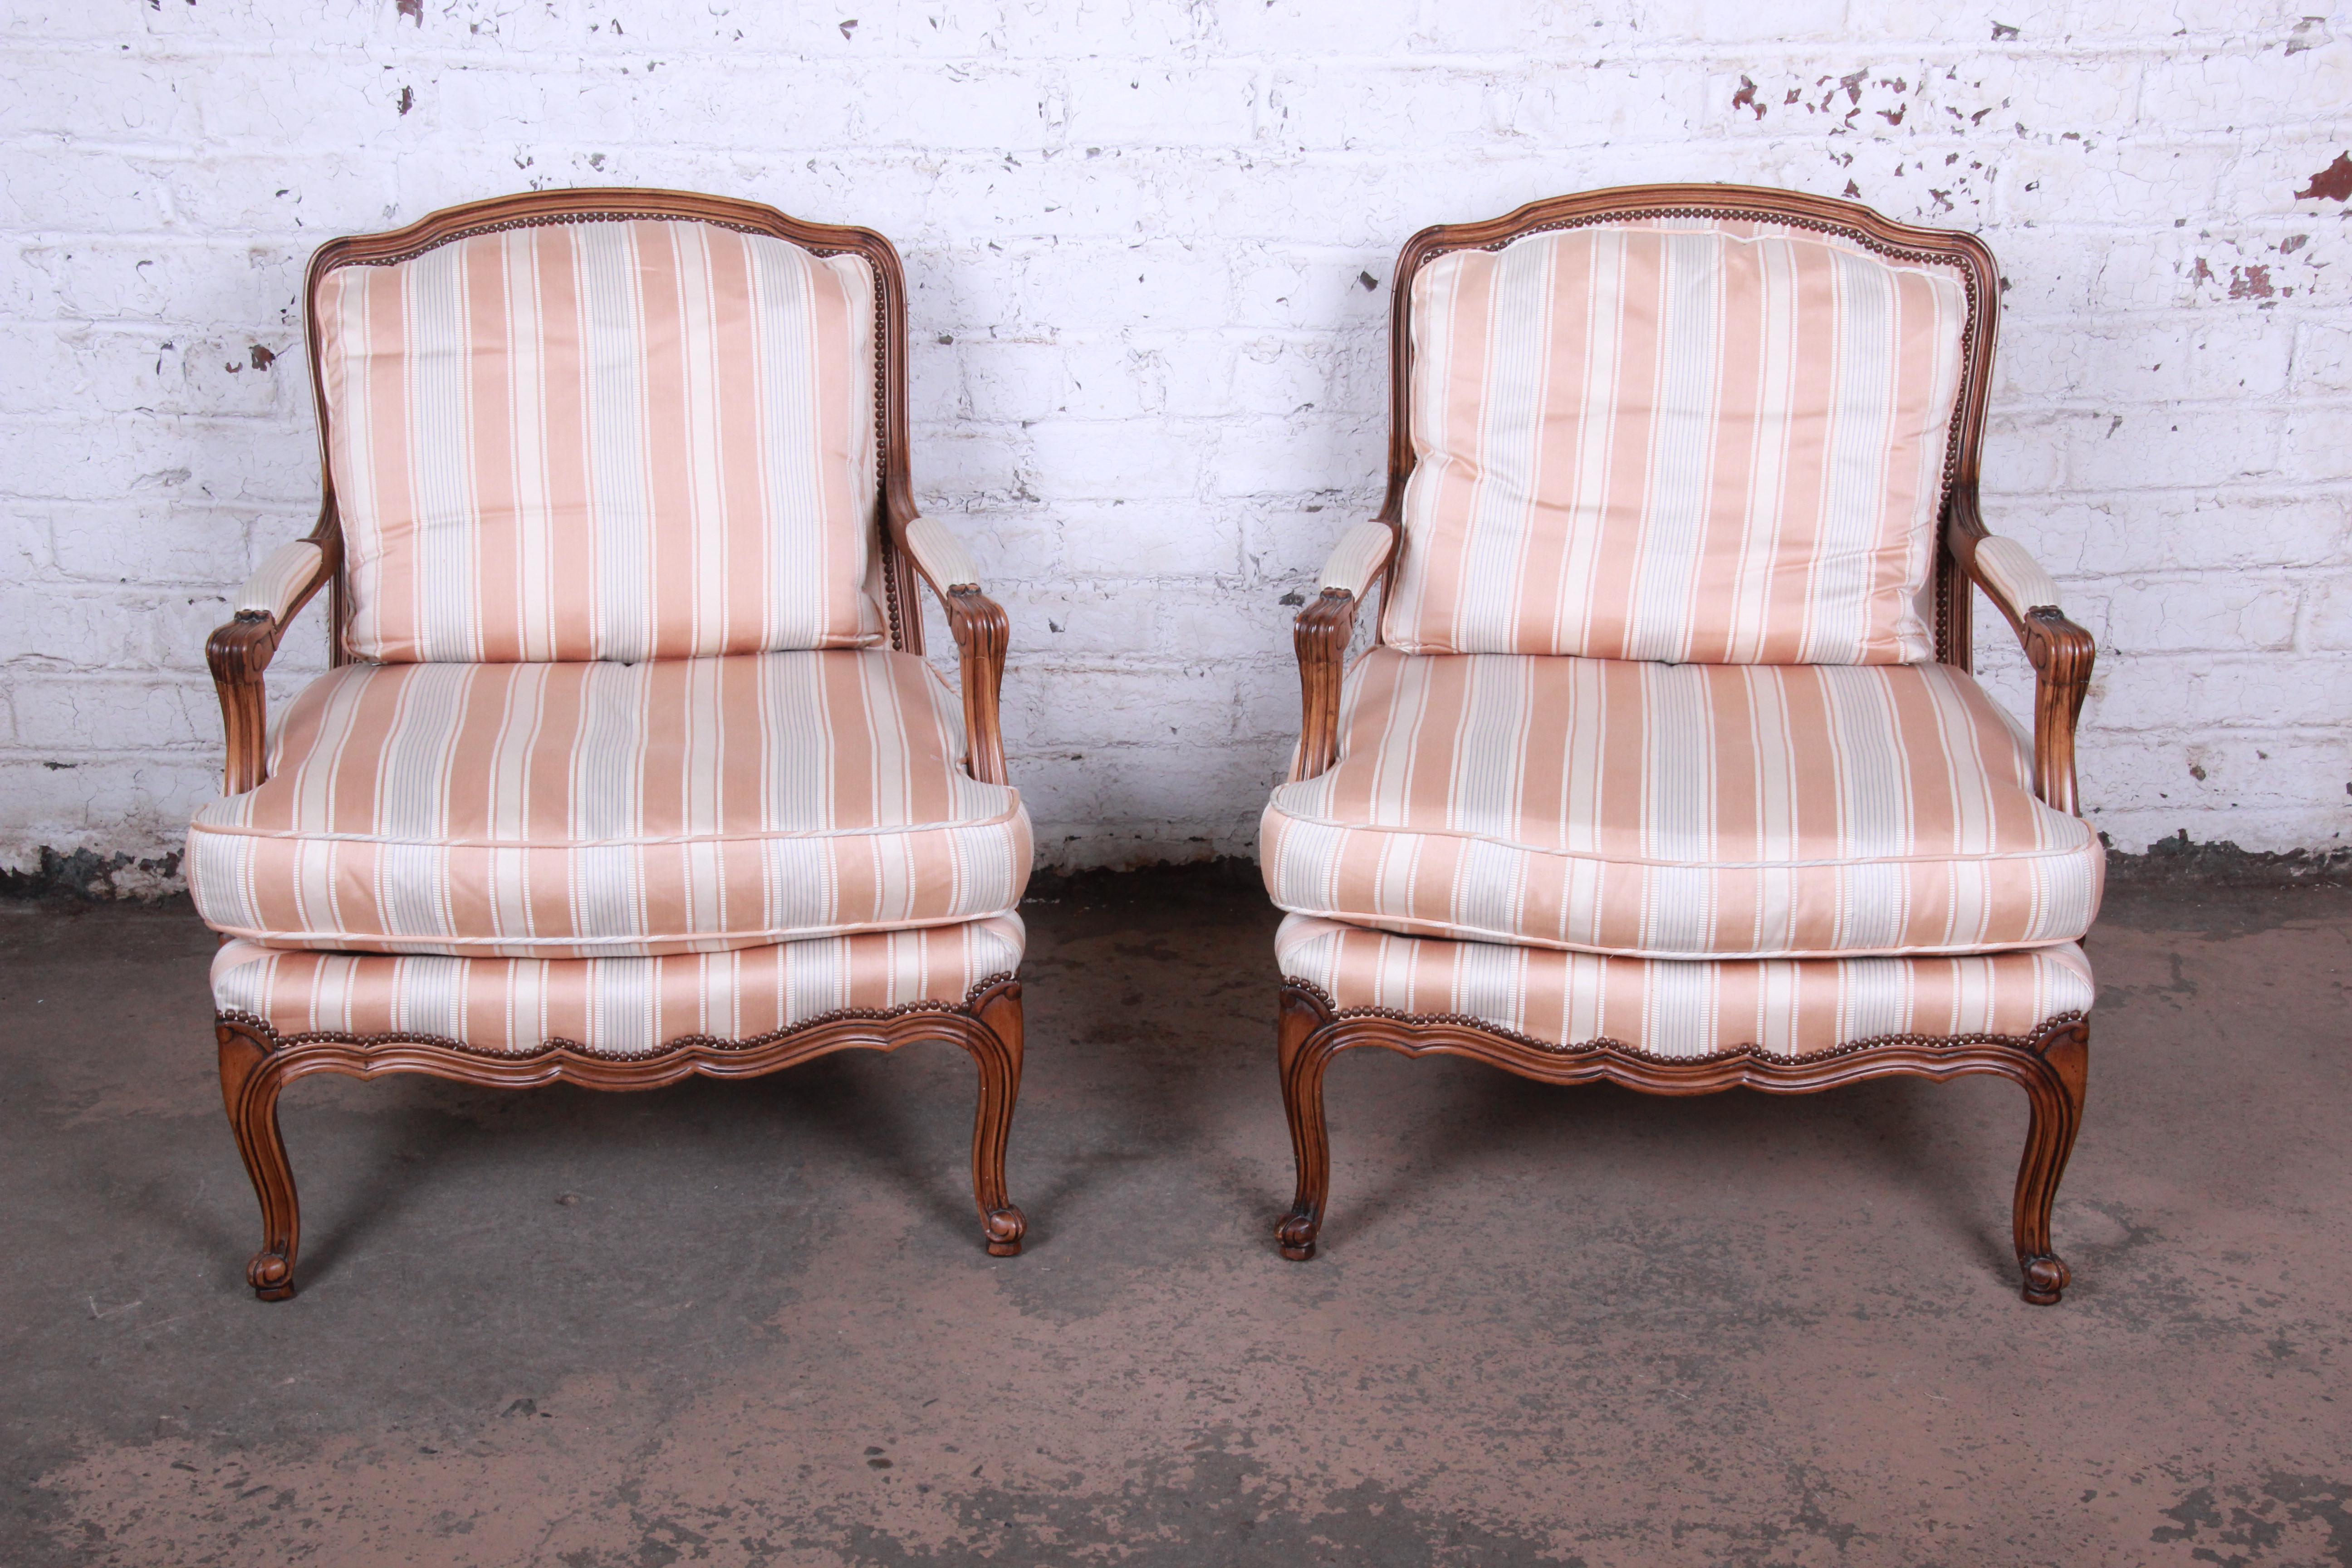 An exceptional pair of open arm bergere chairs in the French Provincial Louis XV style by Baker Furniture. The chairs feature beautifully carved solid walnut frames, original striped upholstery in light pink, light blue, and ivory, and comfortable